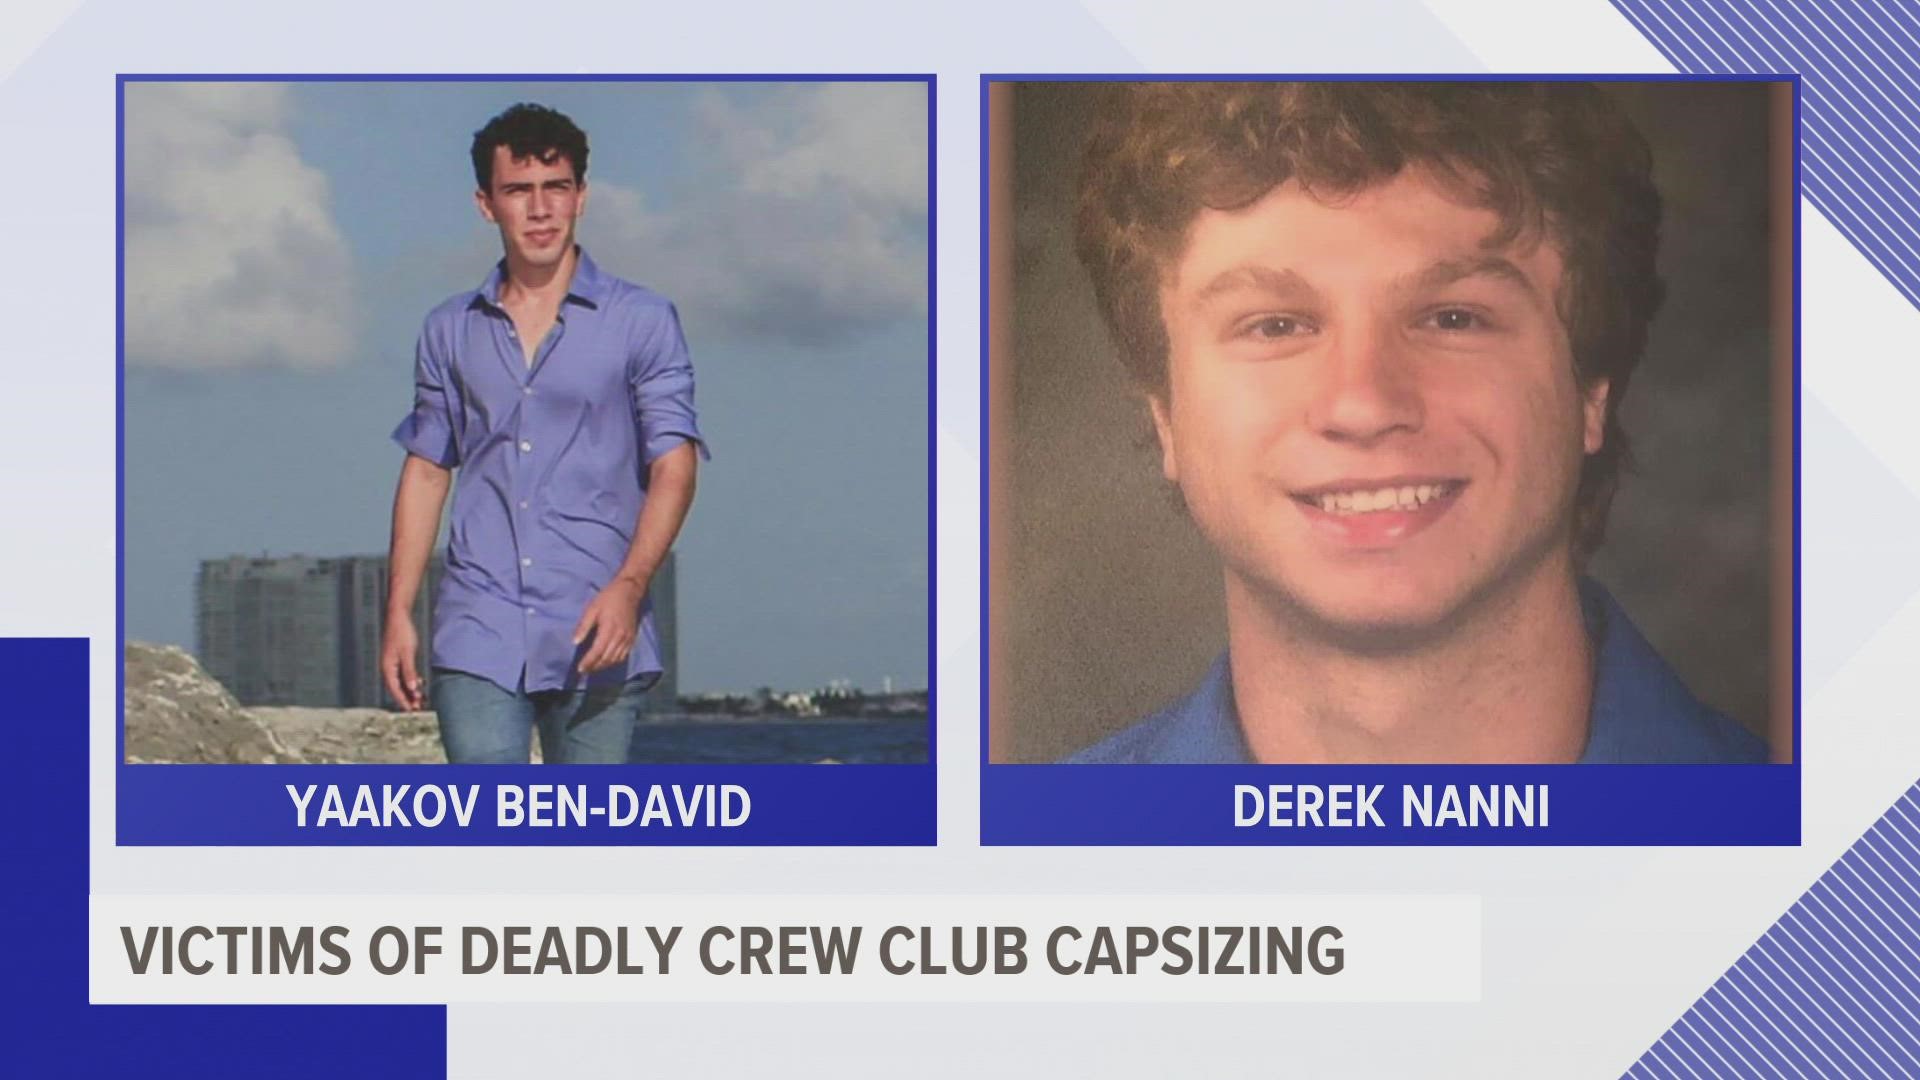 after-iowa-state-crew-club-drownings-reviews-find-university-deficient-in-implementing-health